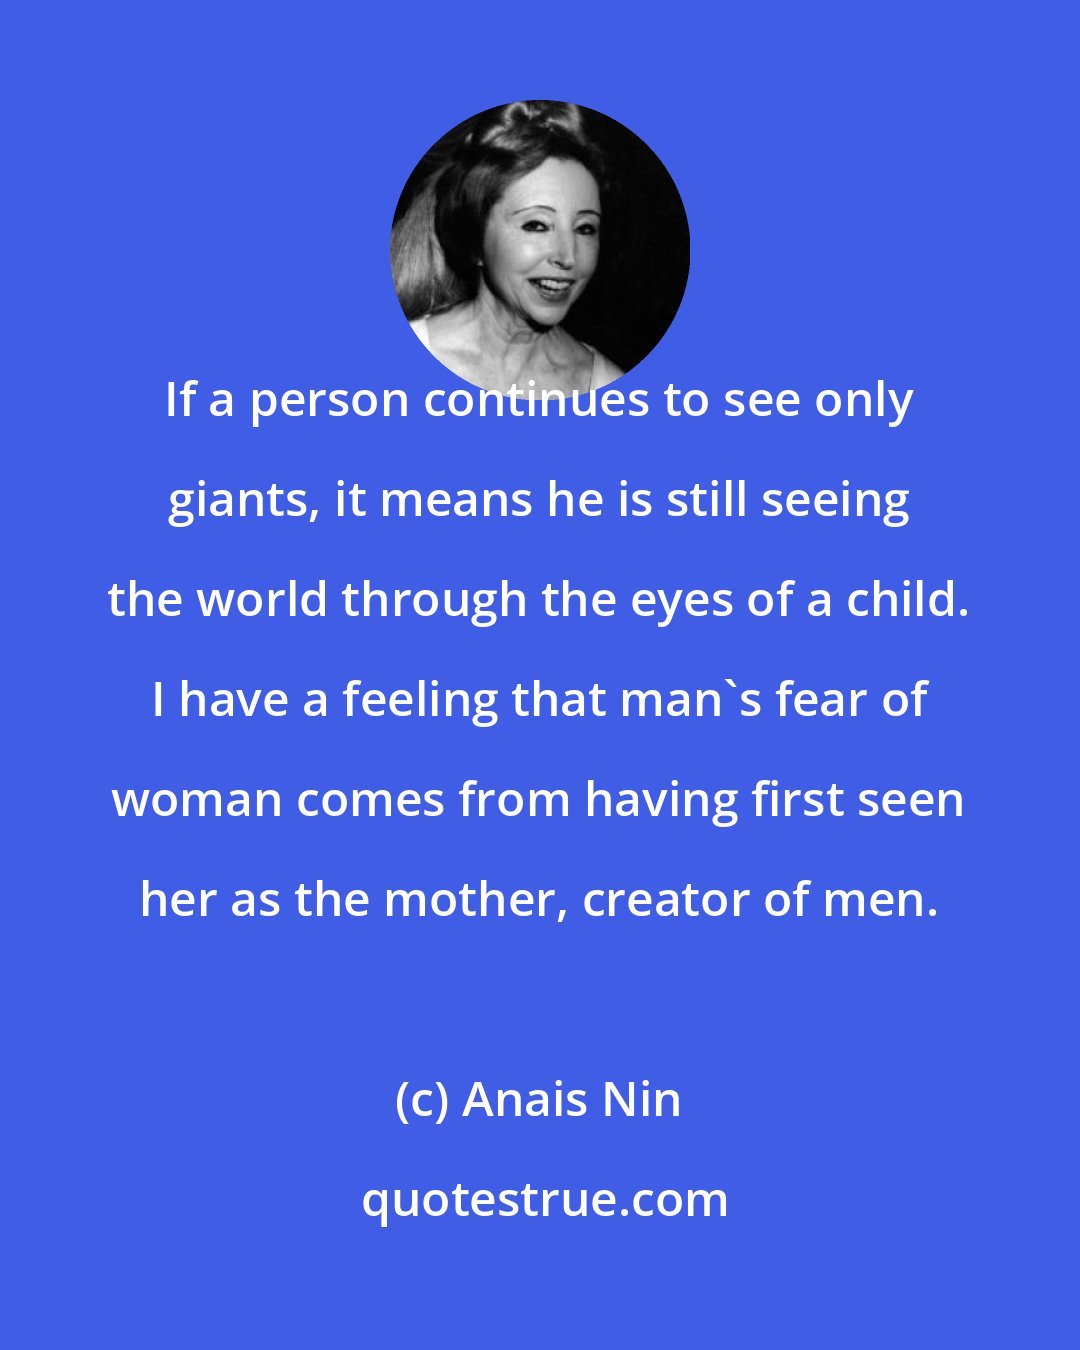 Anais Nin: If a person continues to see only giants, it means he is still seeing the world through the eyes of a child. I have a feeling that man's fear of woman comes from having first seen her as the mother, creator of men.